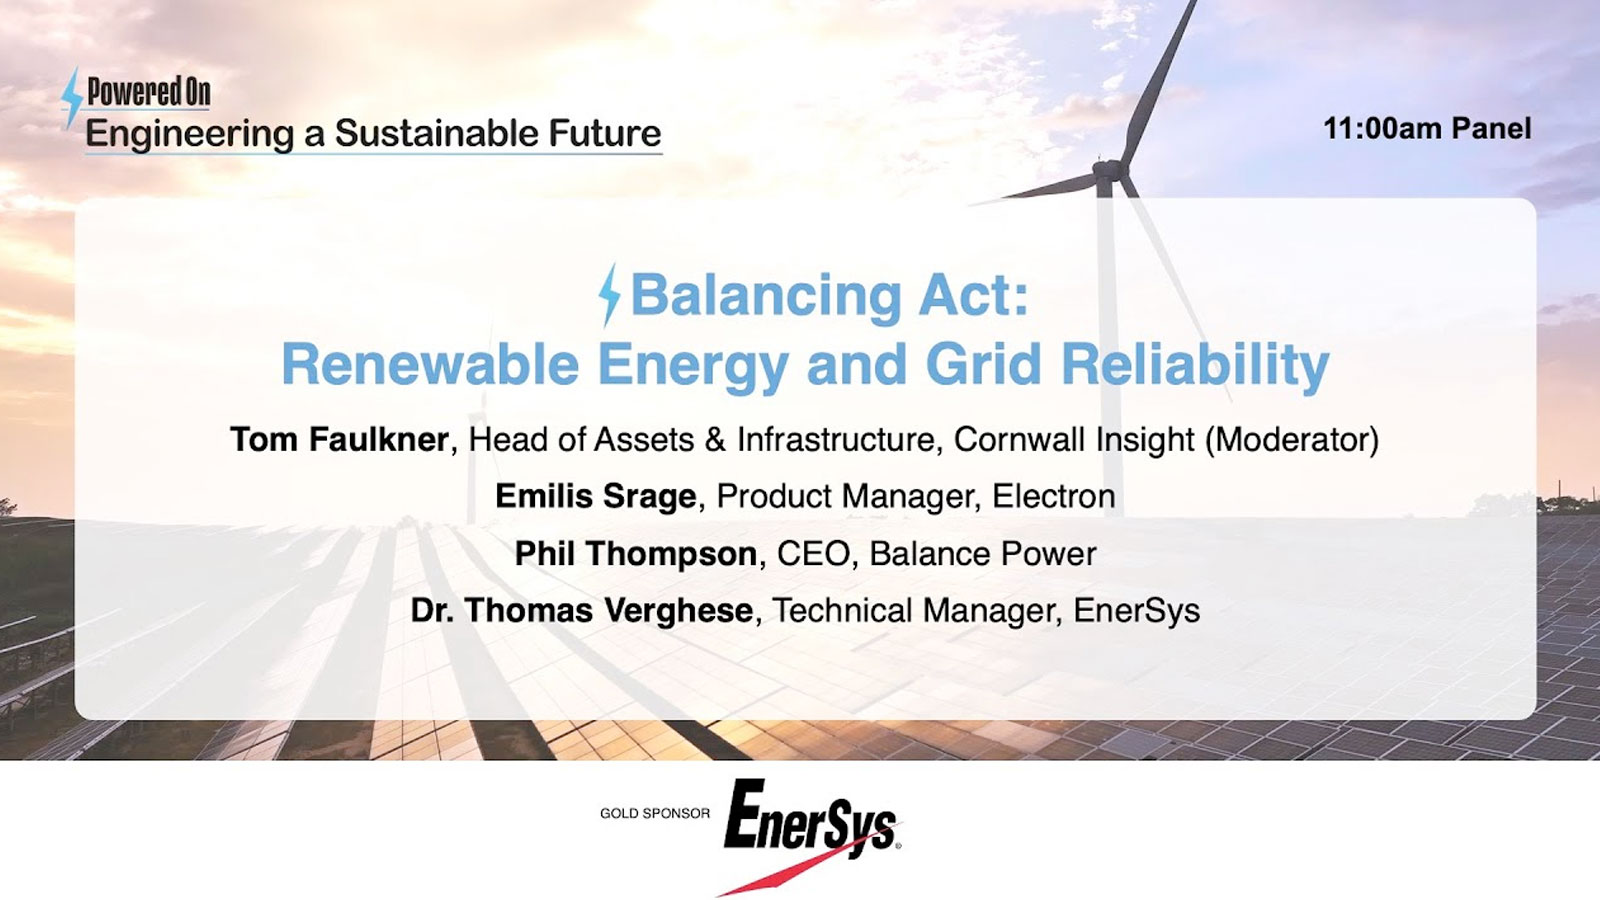 Playing the balancing act between renewable energy and grid reliability